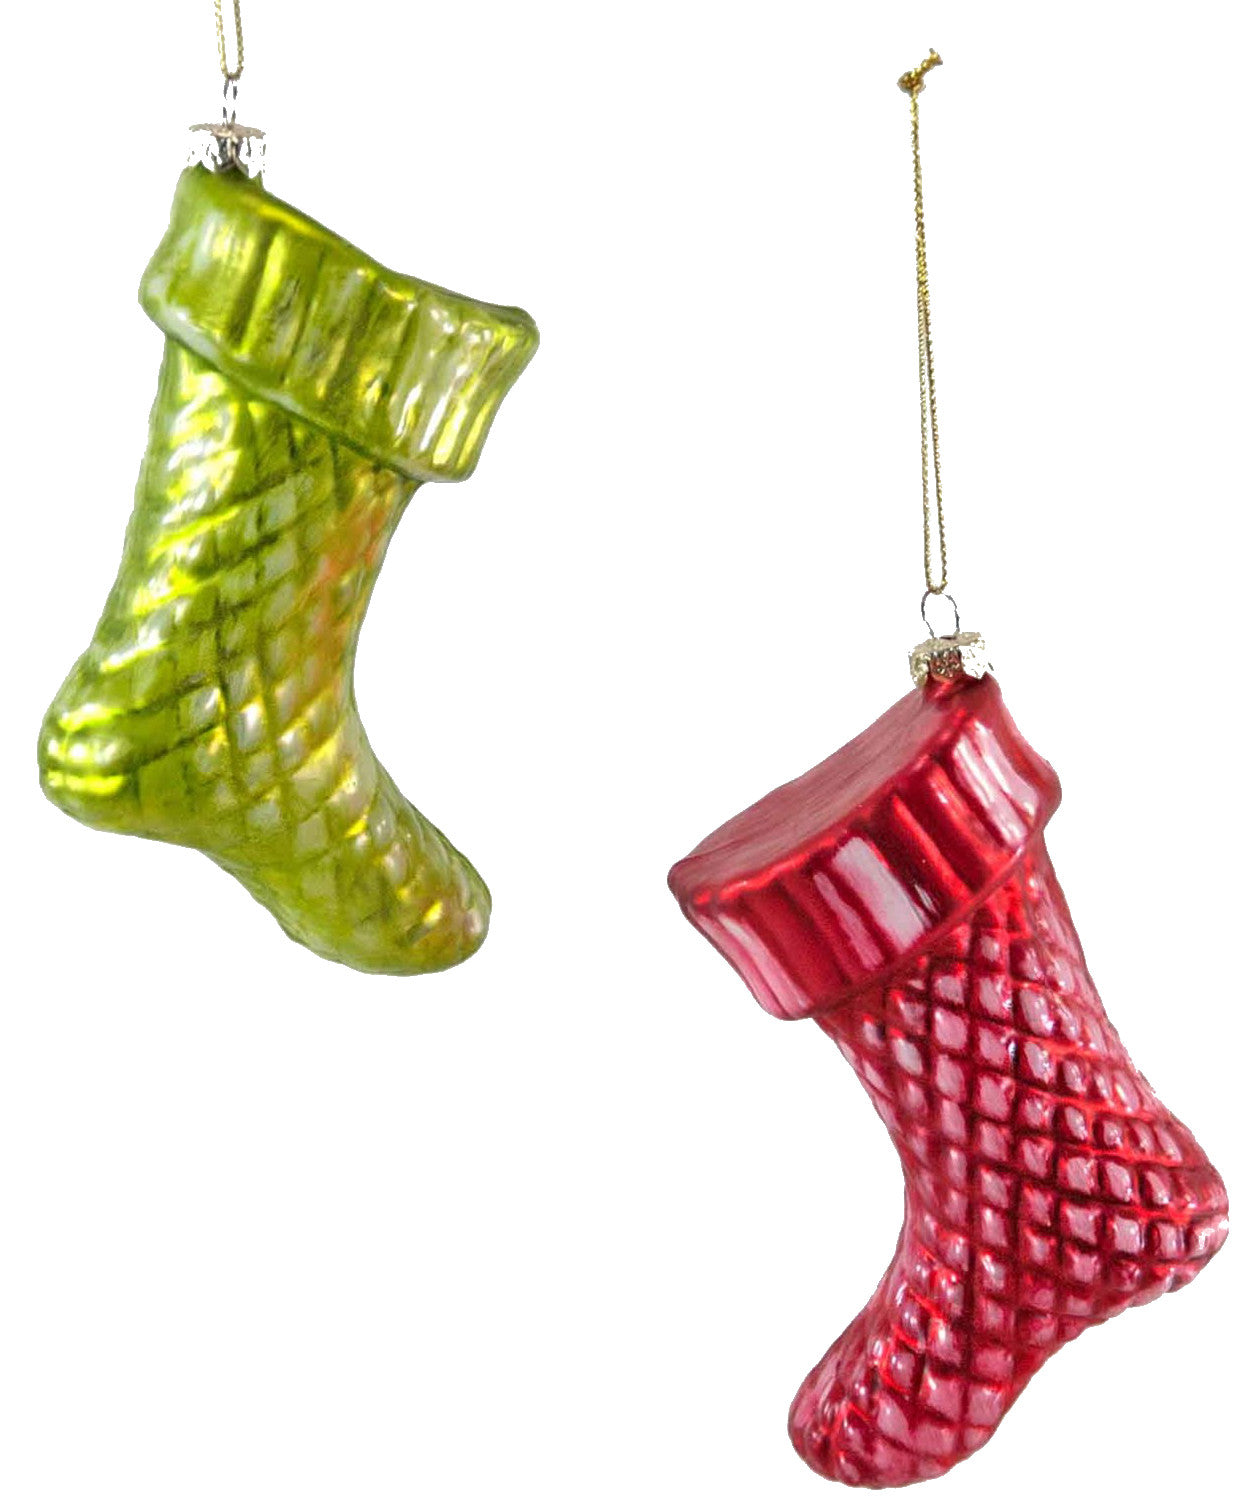 Quilted Stocking Ornaments, red and green glass